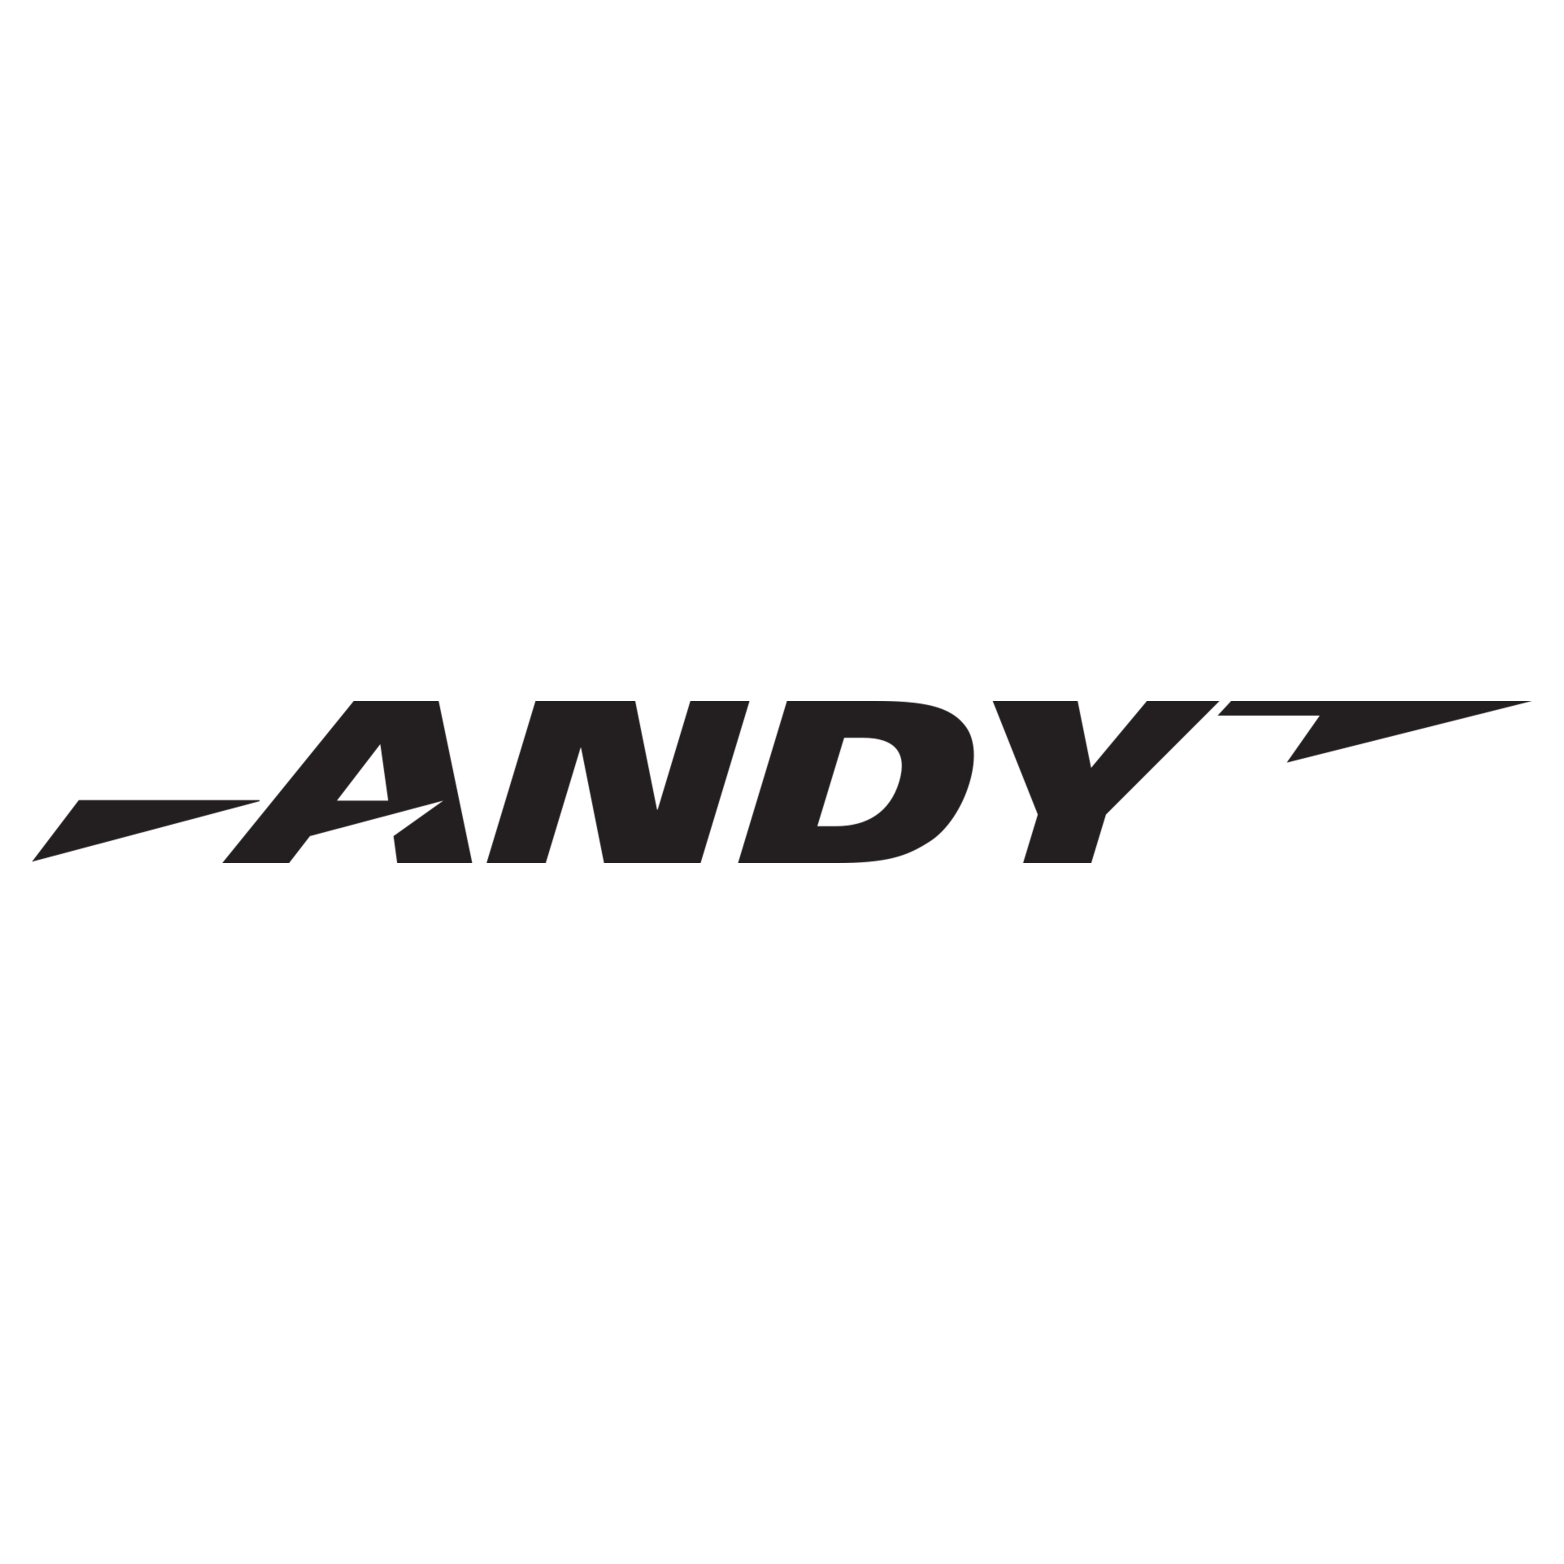 Andy Transport Social T Social Media Marketing Agency Digital Strategy Services Canada.png